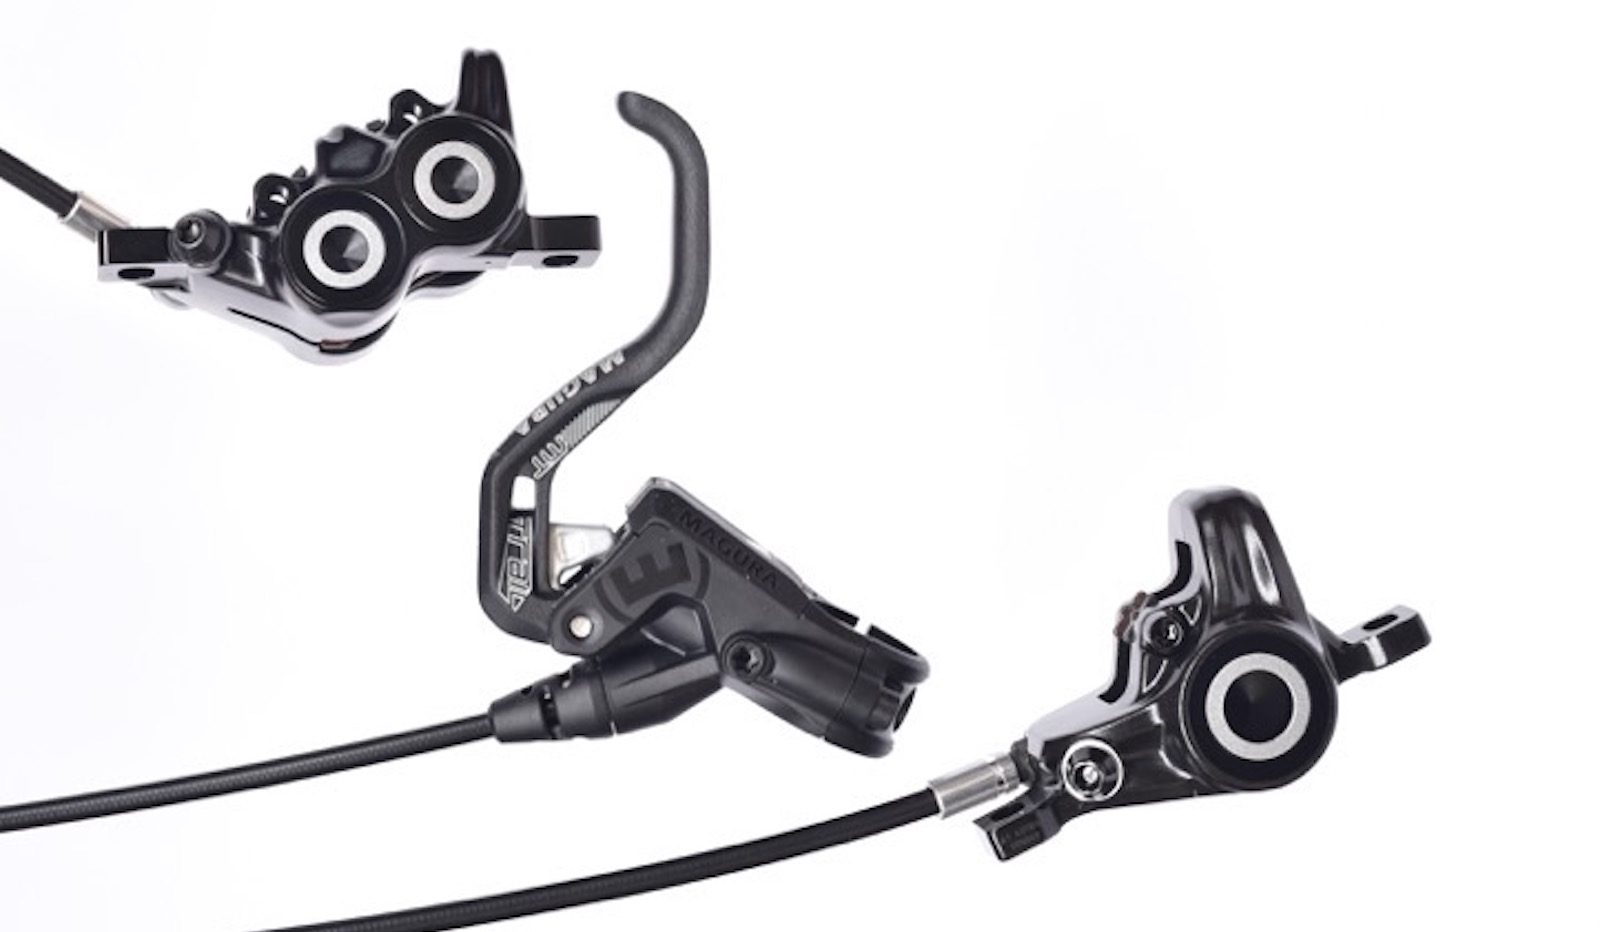 MT-Trail-Sport-calipers-and-lever-1600x932.jpeg